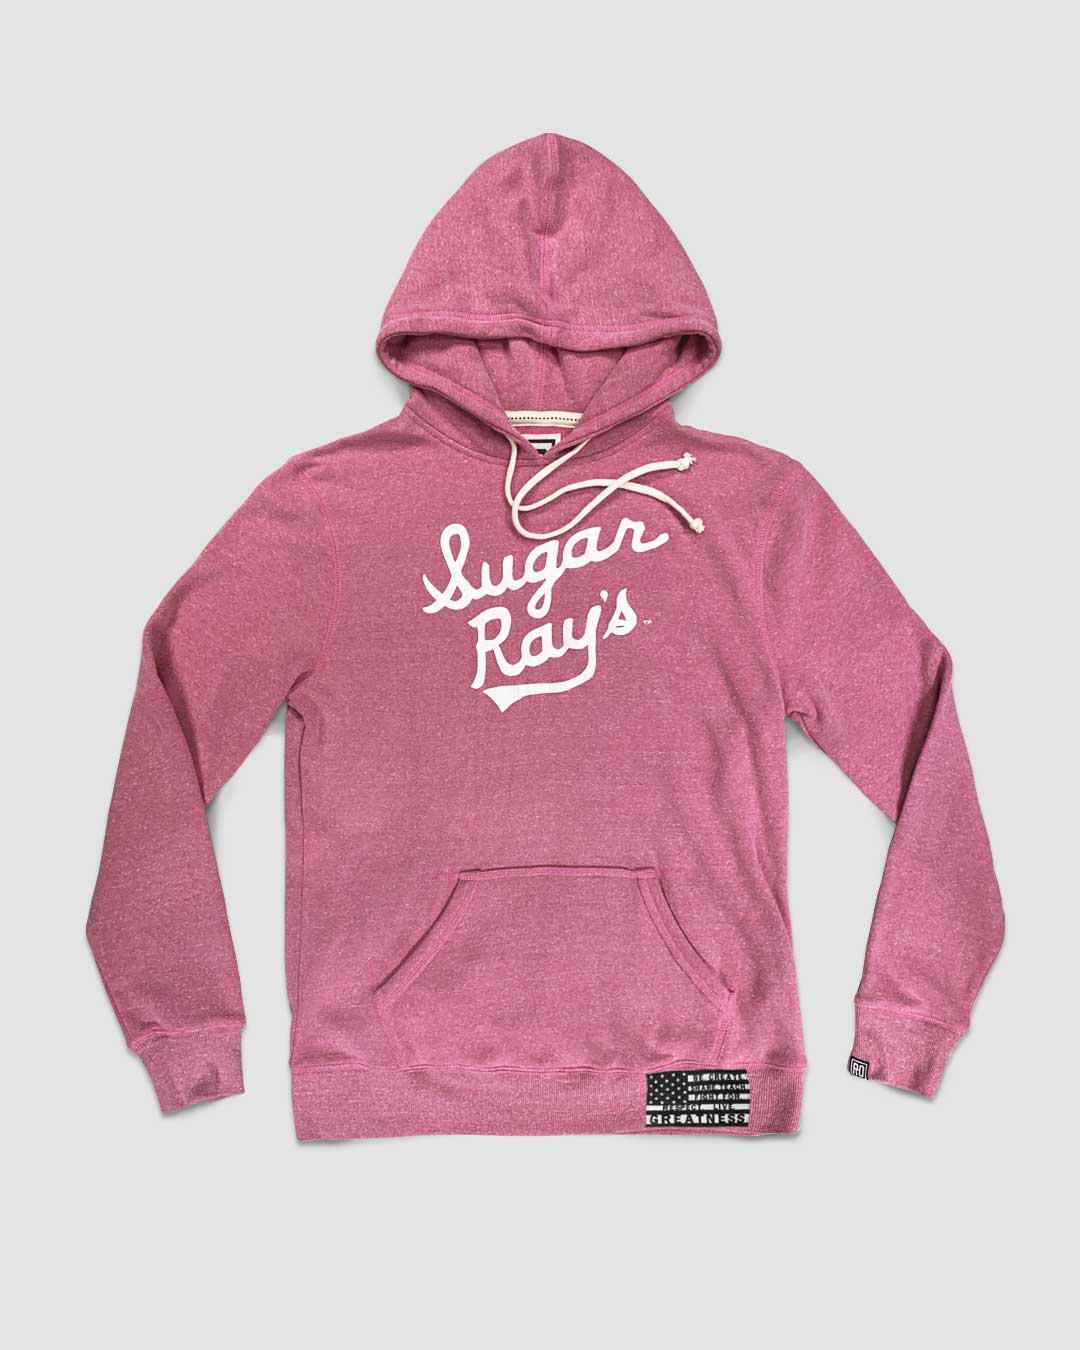 BHT - Sugar Ray Robinson Pullover Hoody - Roots of Inc dba Roots of Fight